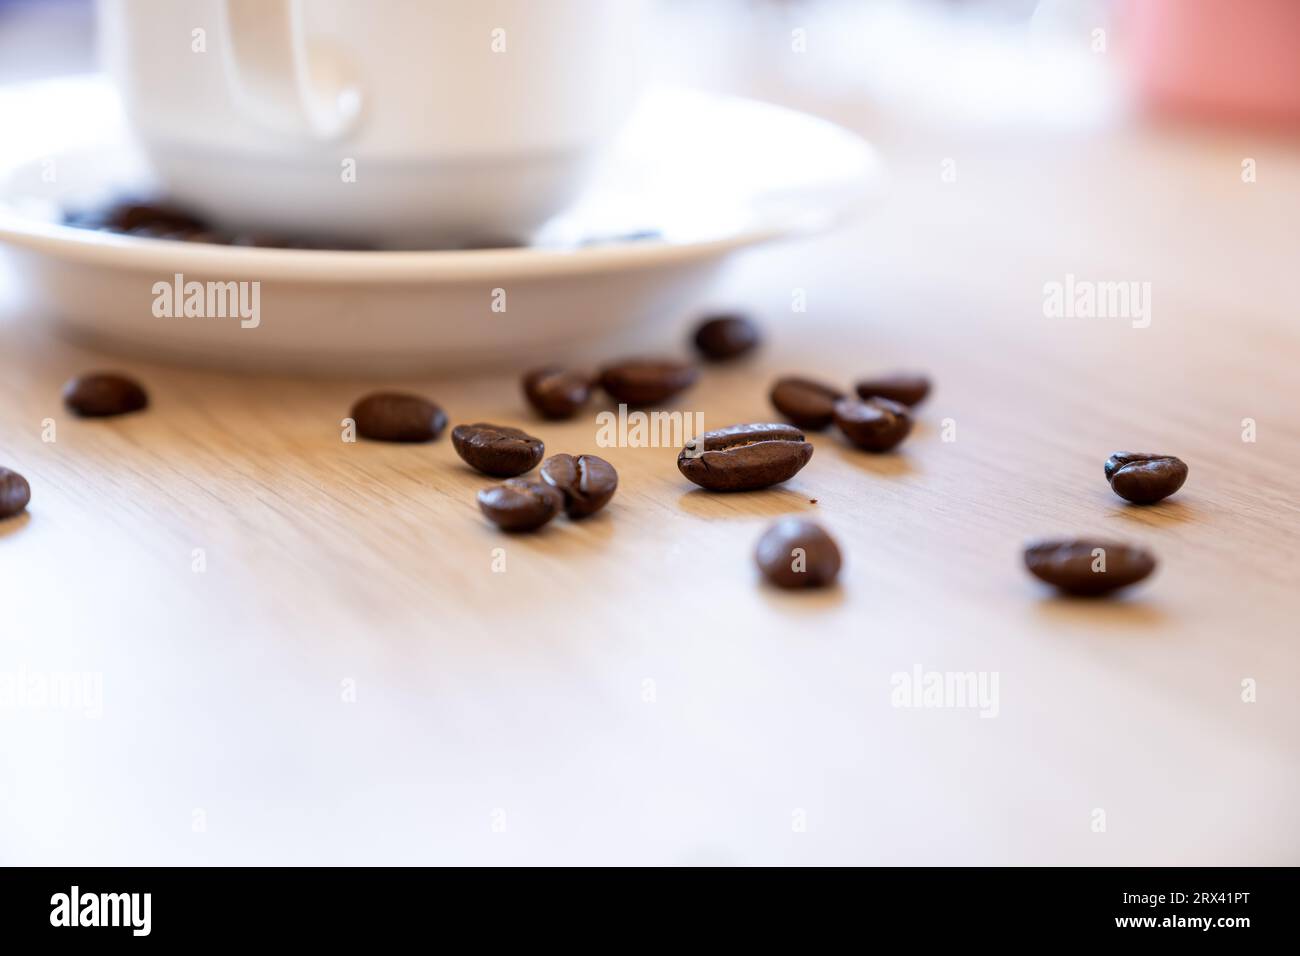 Cup of coffee that full of coffee beans on wooden background with rim light Stock Photo